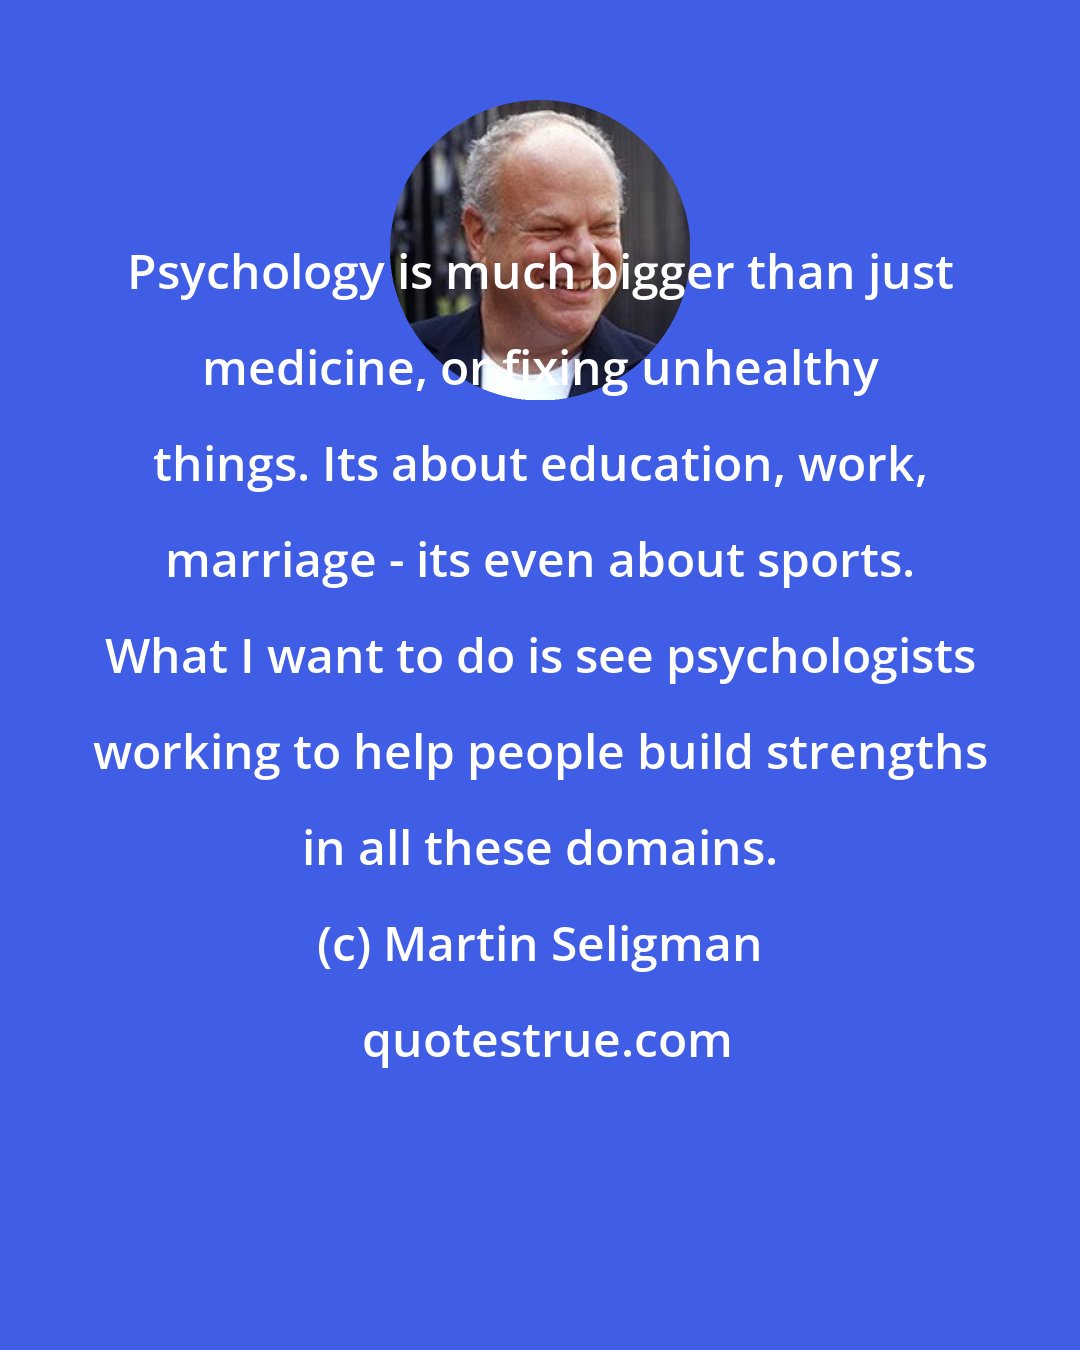 Martin Seligman: Psychology is much bigger than just medicine, or fixing unhealthy things. Its about education, work, marriage - its even about sports. What I want to do is see psychologists working to help people build strengths in all these domains.